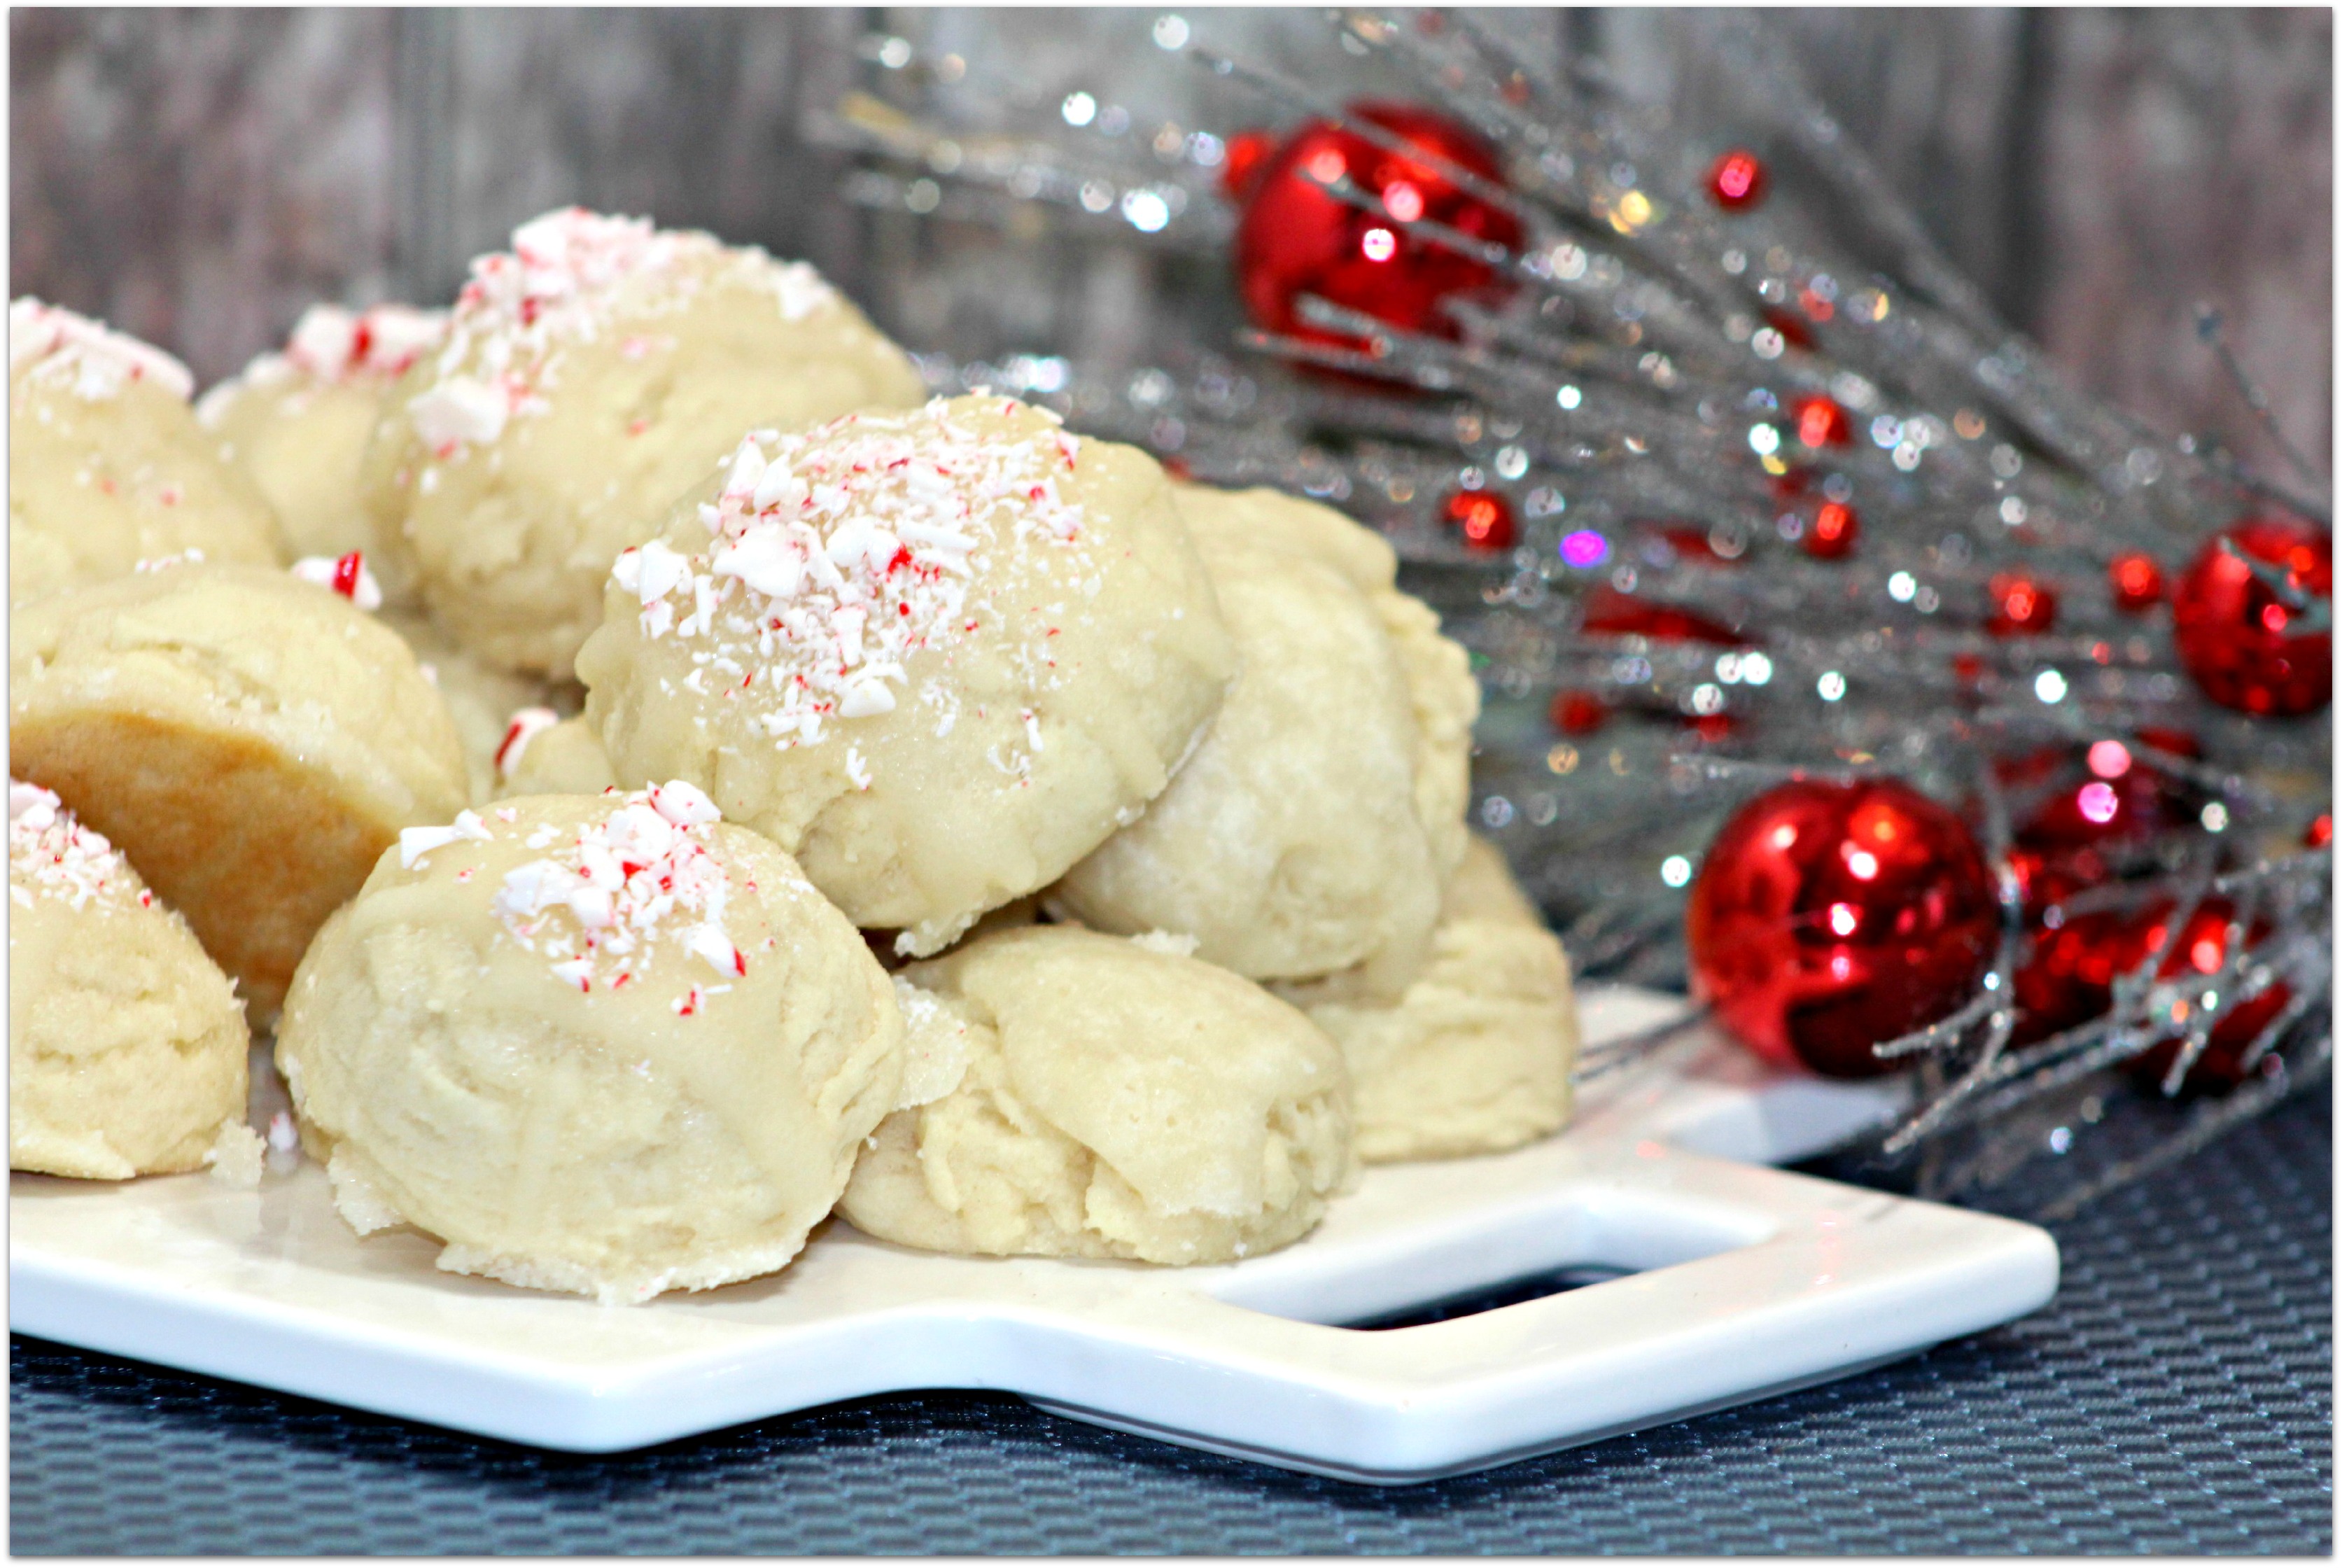 This Kentucky Butter Cookie recipe is easy and such a great grown-up treat for your Christmas party! I love having desserts on hand for guests, and this is one everyone will love! Have friends each bring an appetizer and you can serve dessert, for a ready-made holiday party! Who says you need to slave in the kitchen making food?